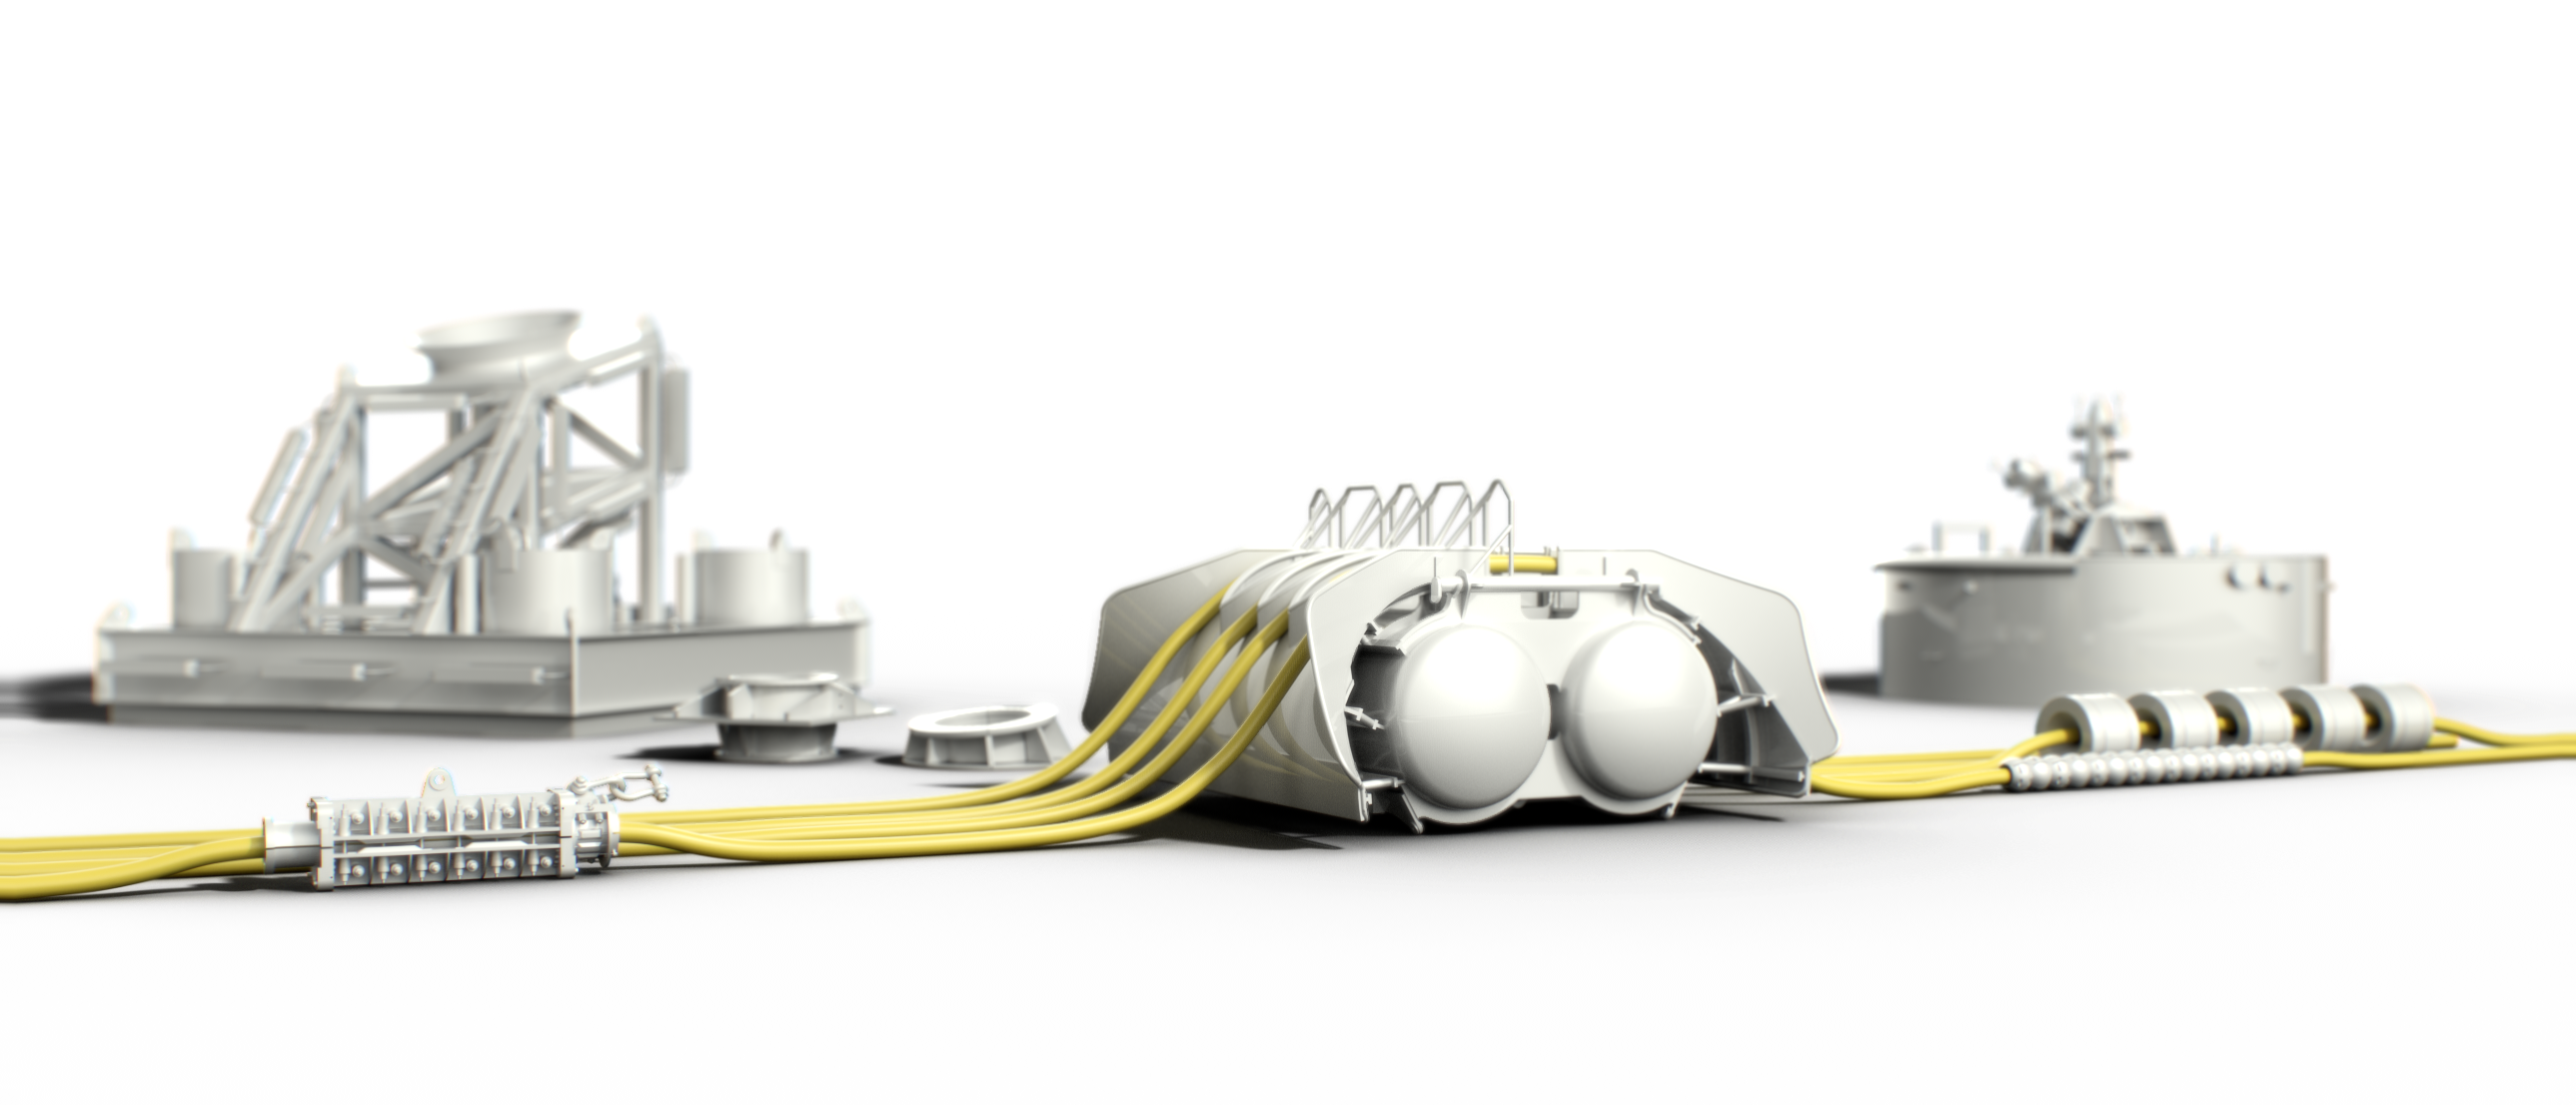 Subsea components for a flexible pipe system 